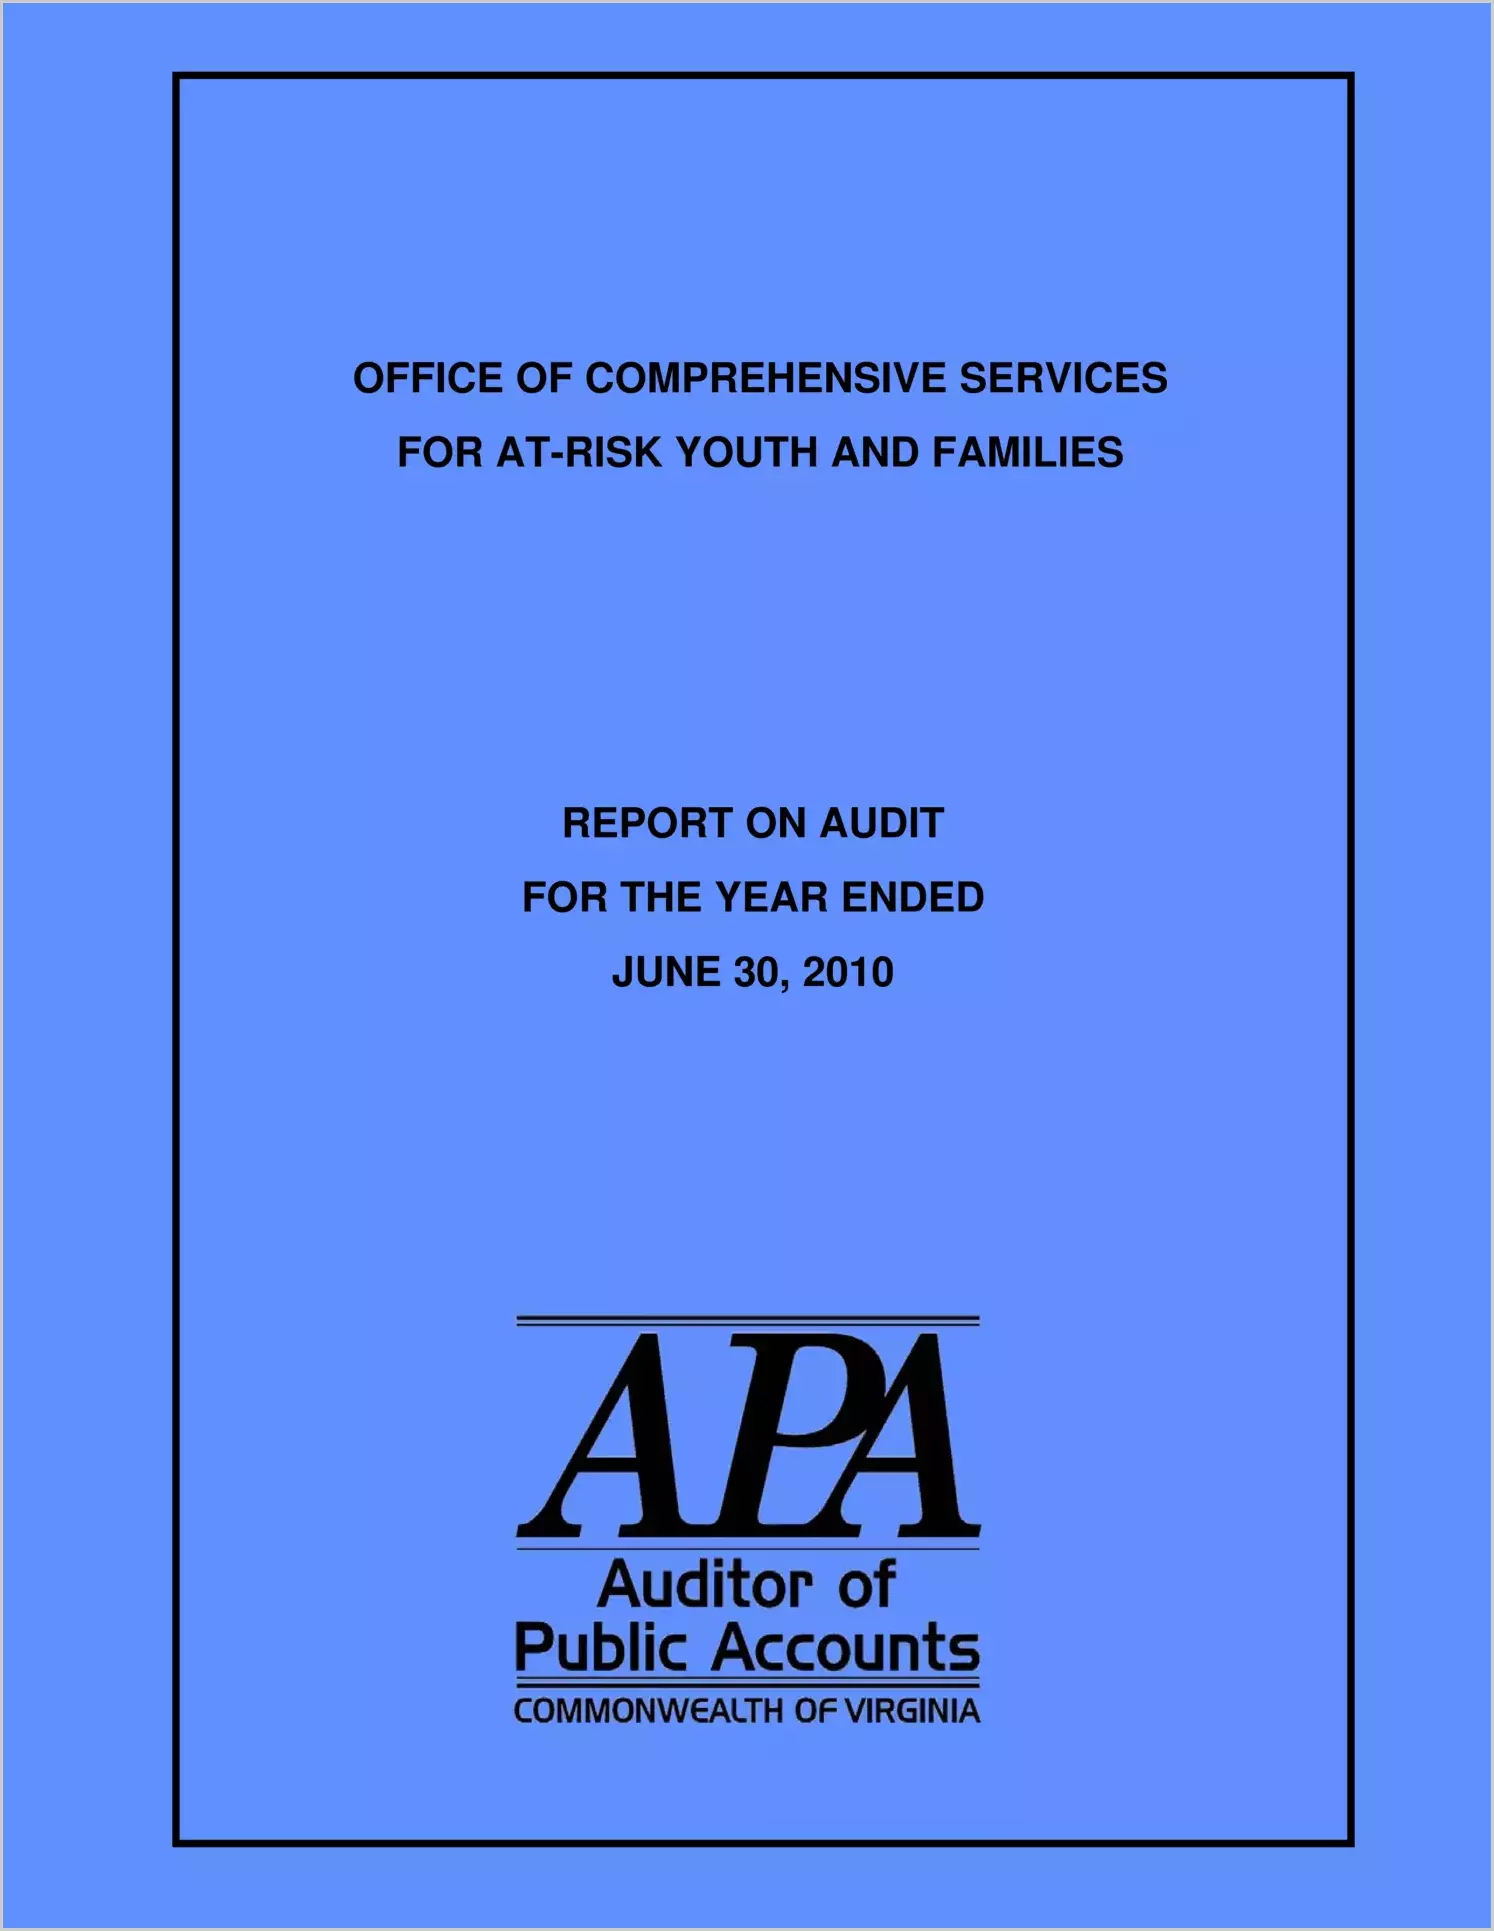 Office of Comprehensive Services for At-Risk Youth and Families for the year ended June 30, 2010